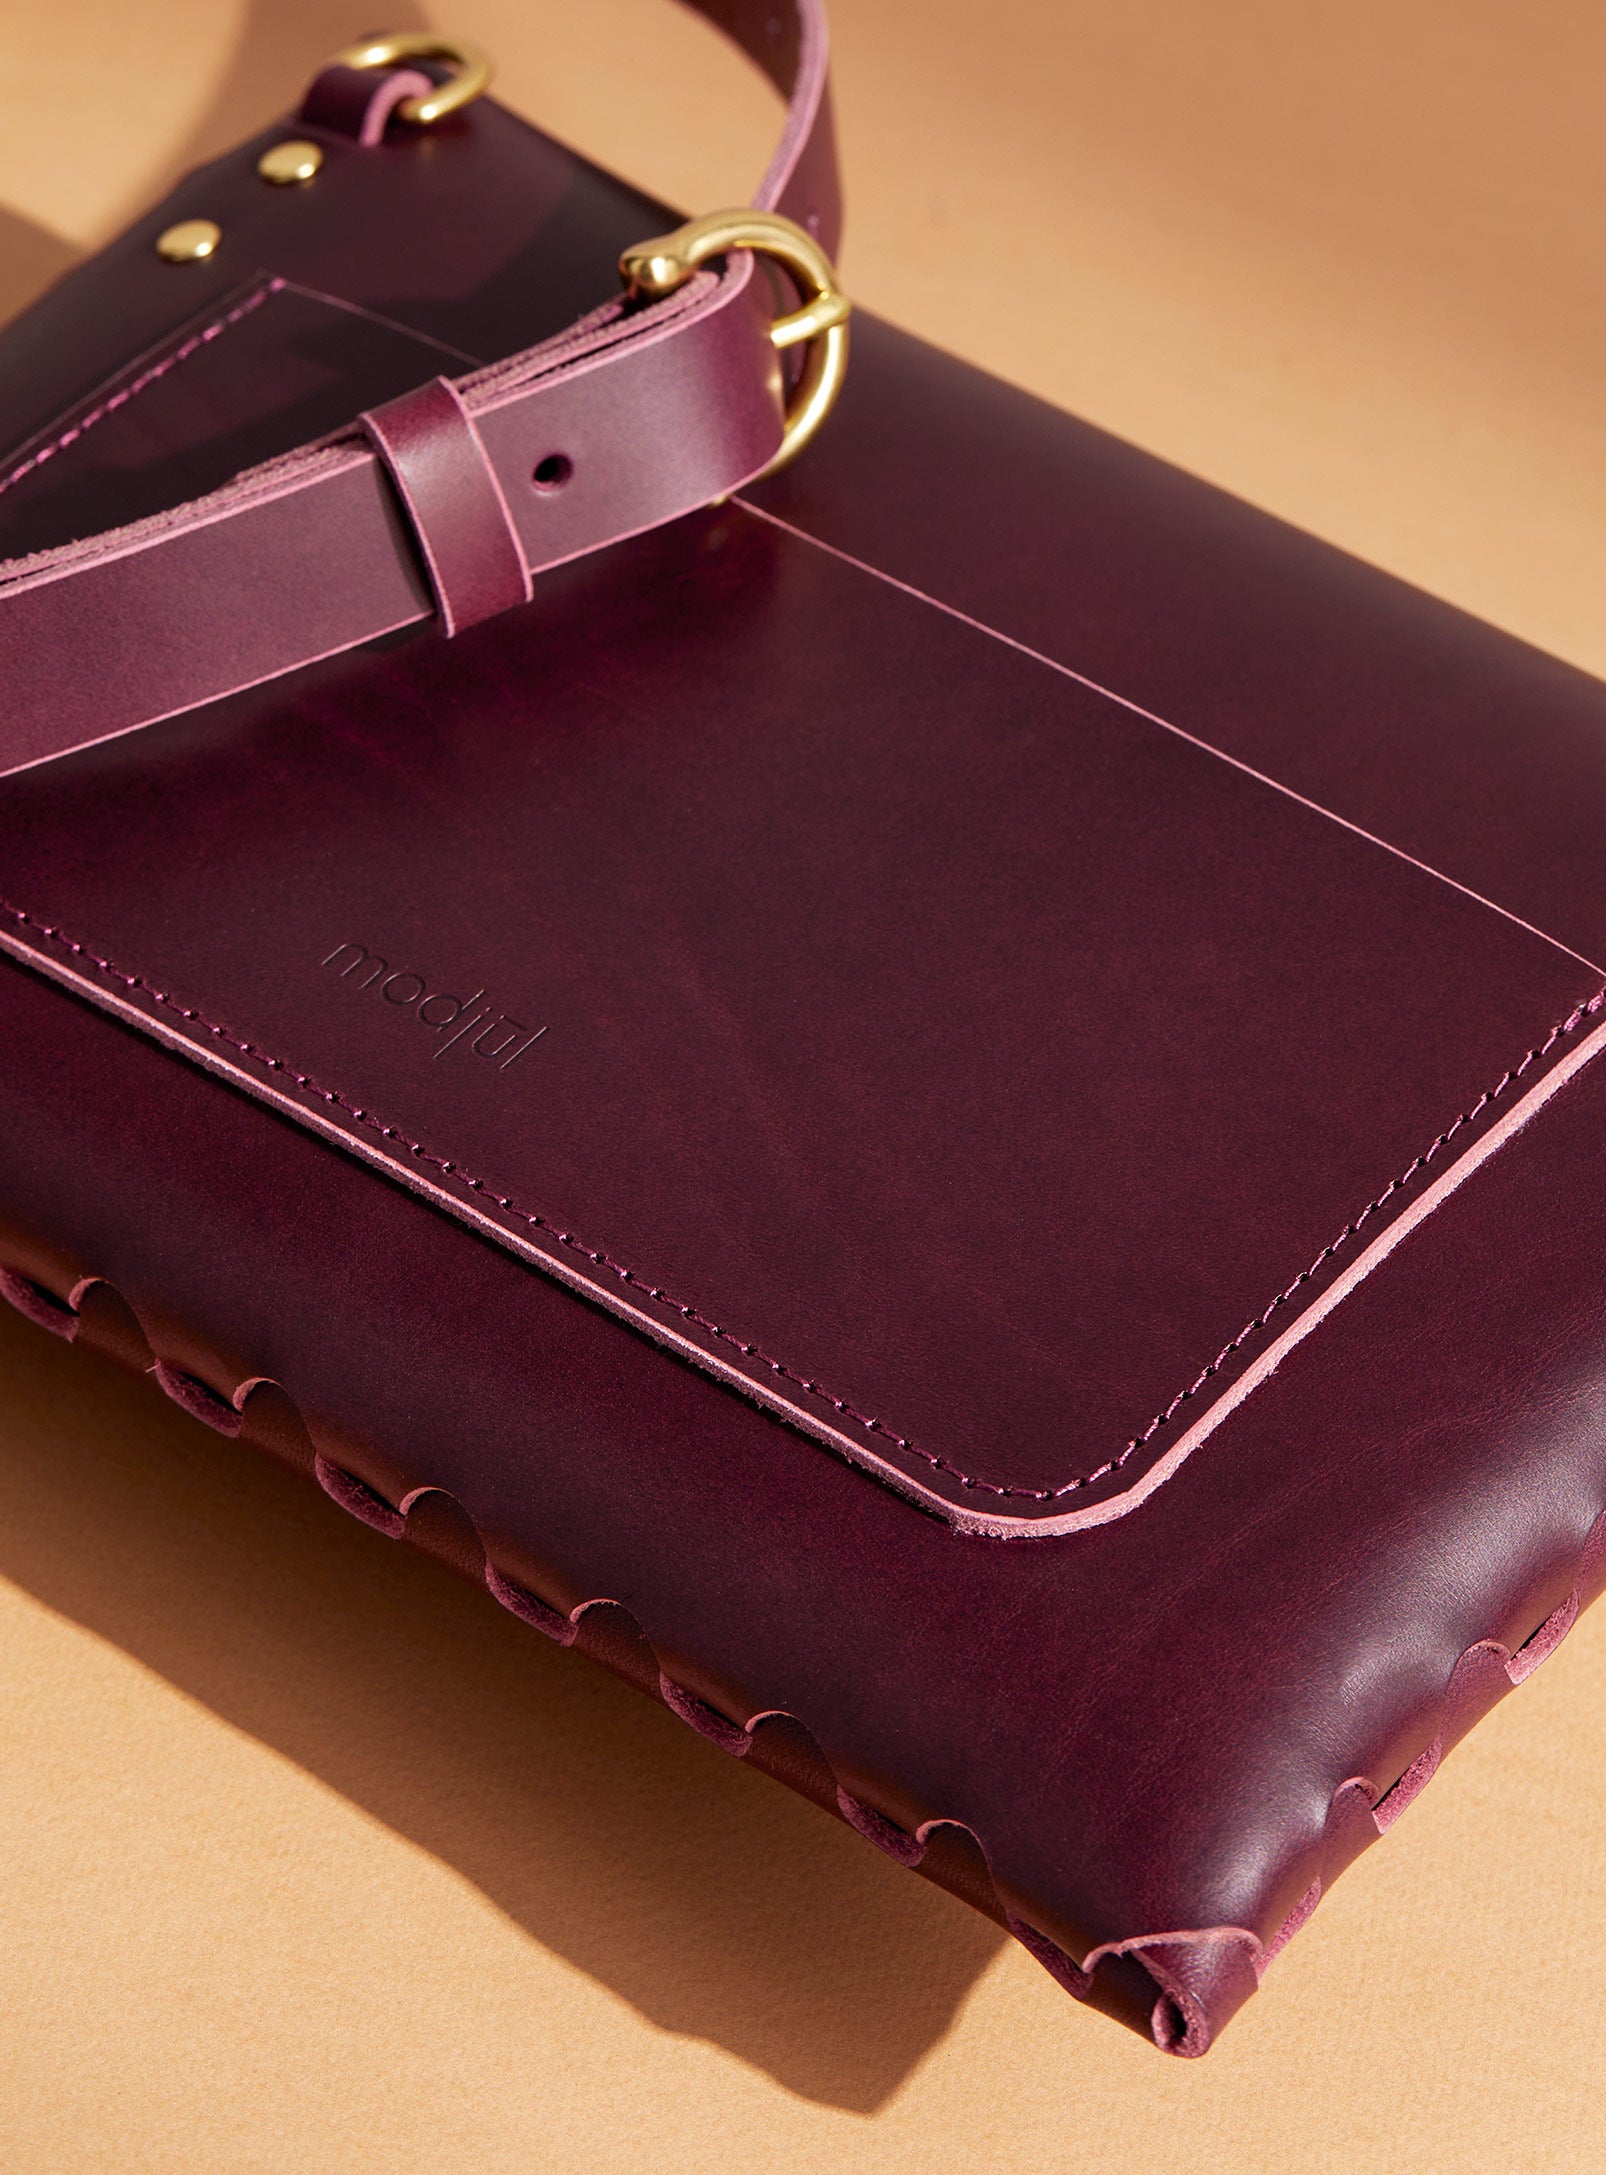 A close up of the back pocket detail on the mini bag deluxe handcrafted in Canada using burgundy Italian leather and quality brass hardware.